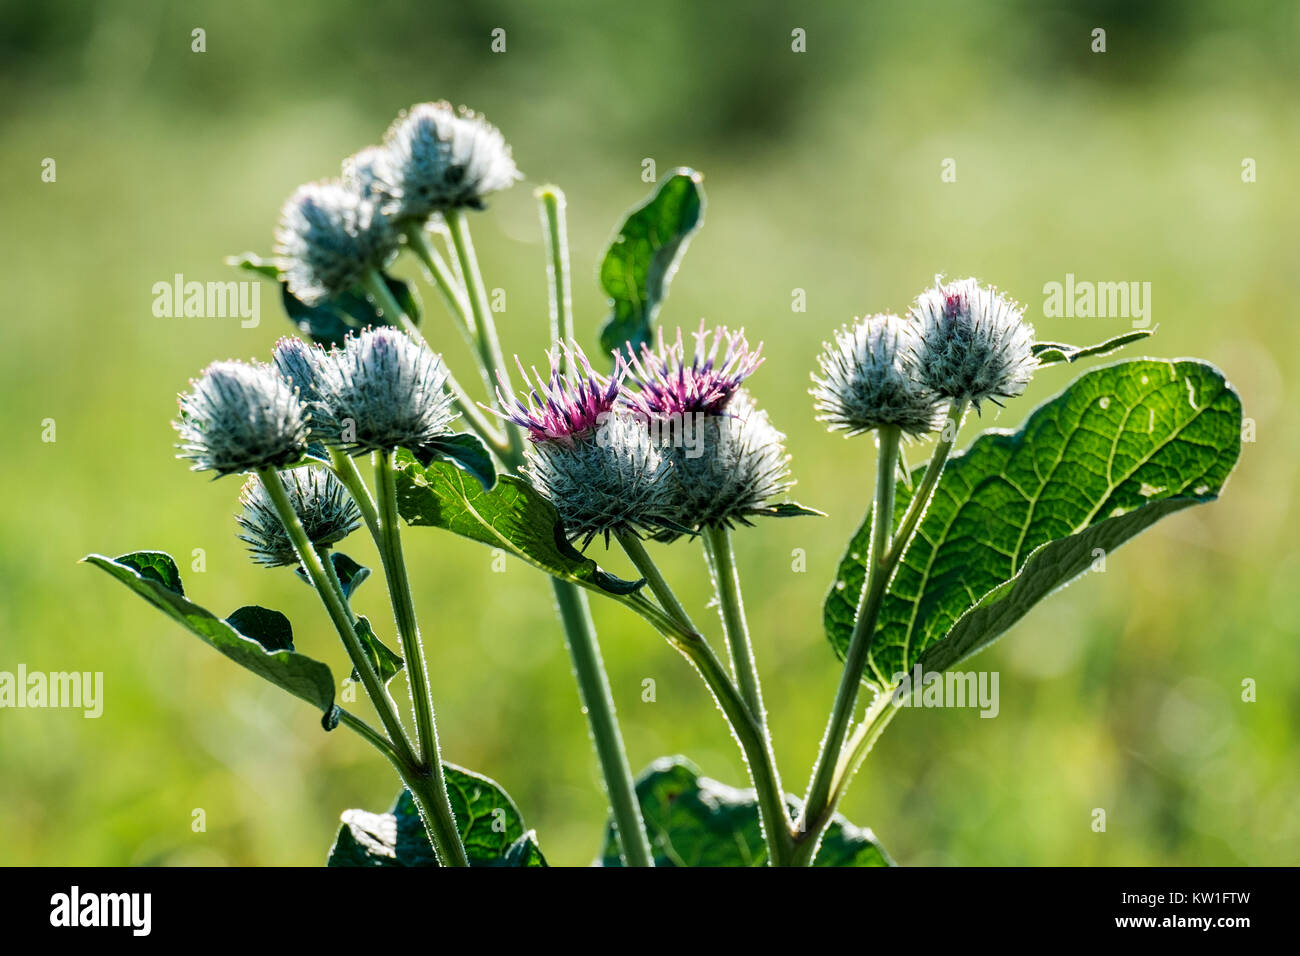 Woolly Seeds High Resolution Stock Photography and Images - Alamy